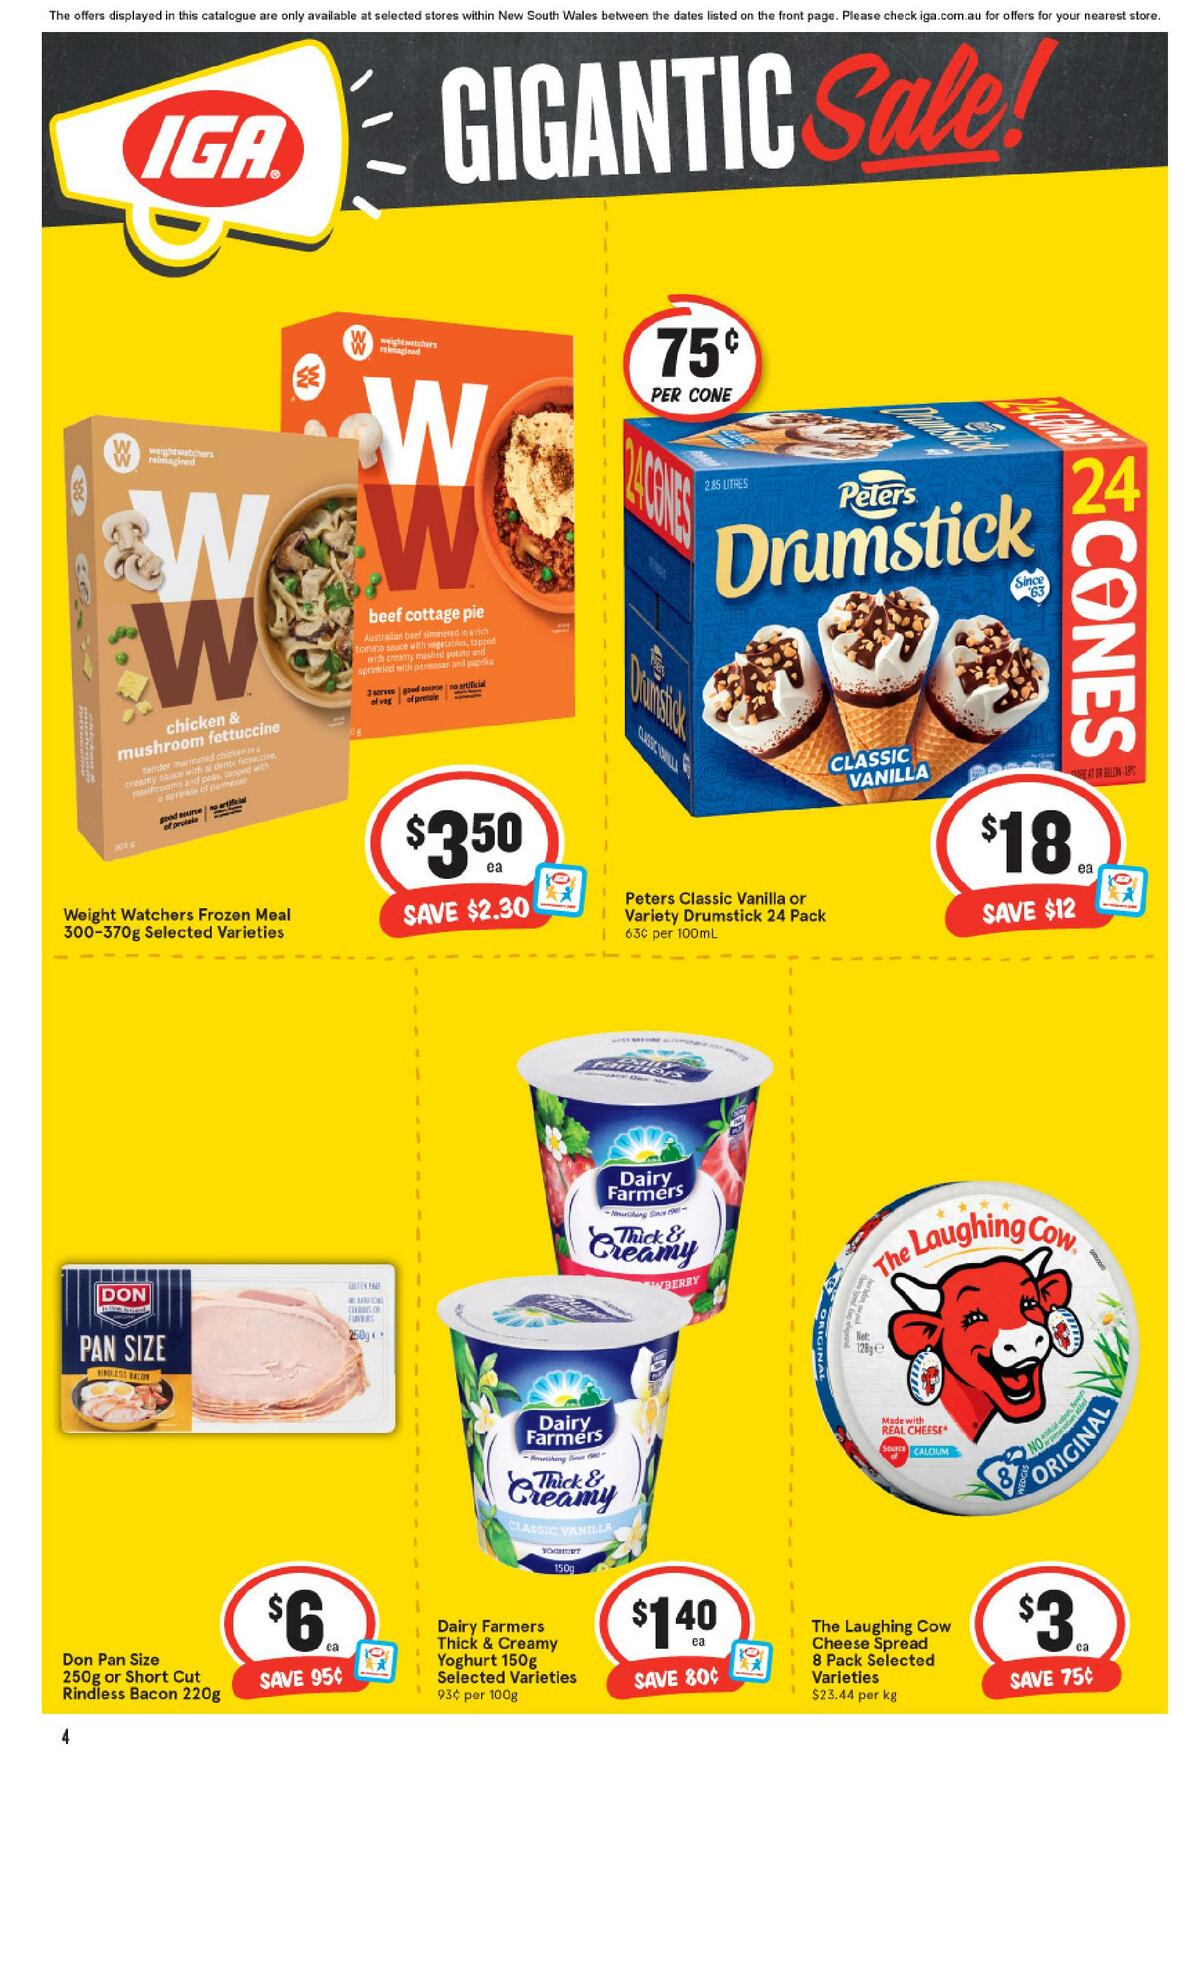 IGA Catalogues from 13 October